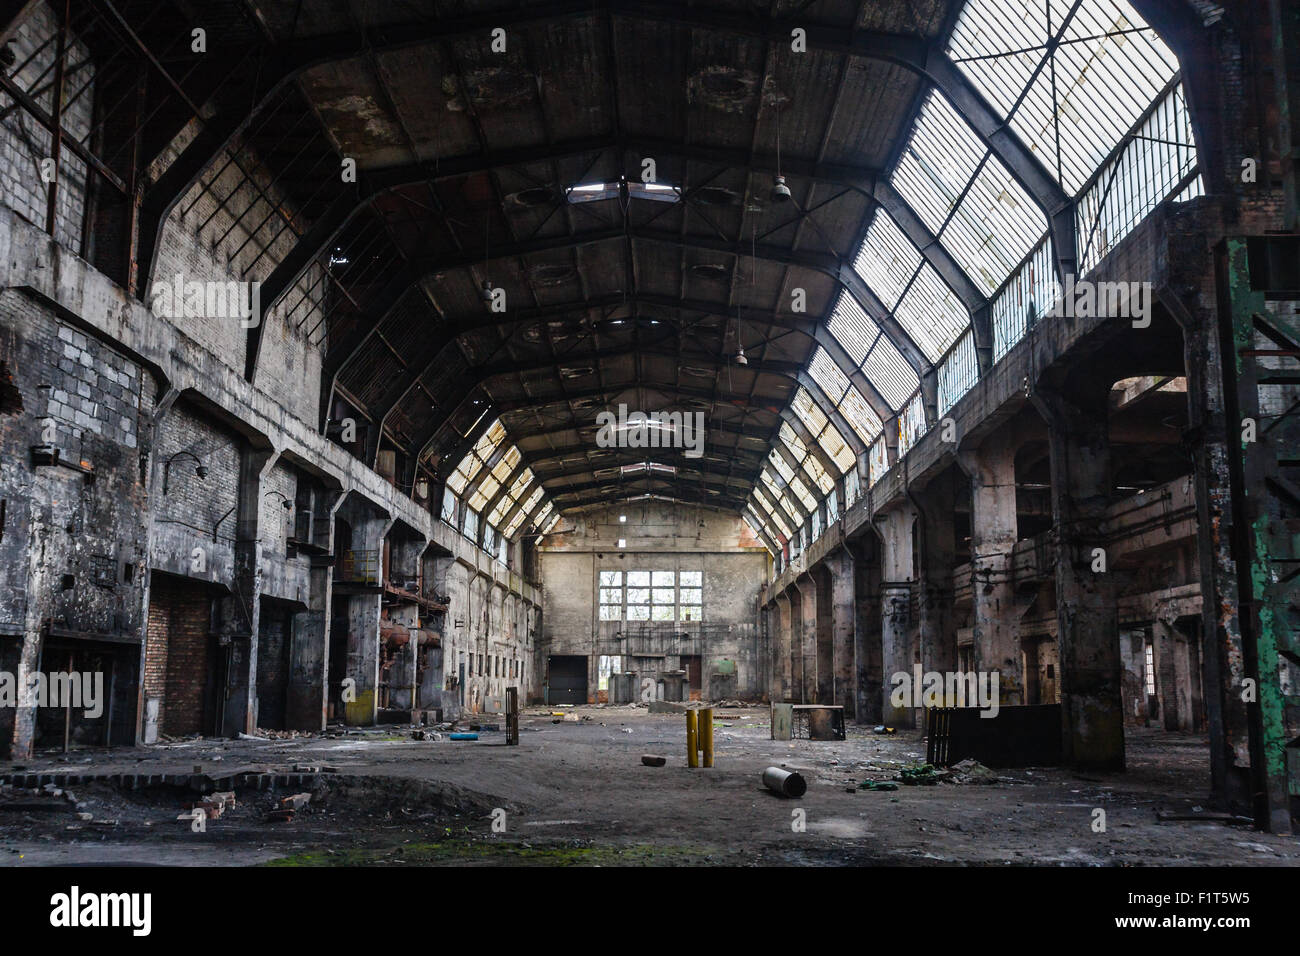 Abandoned destroyed building, industrial background Stock Photo